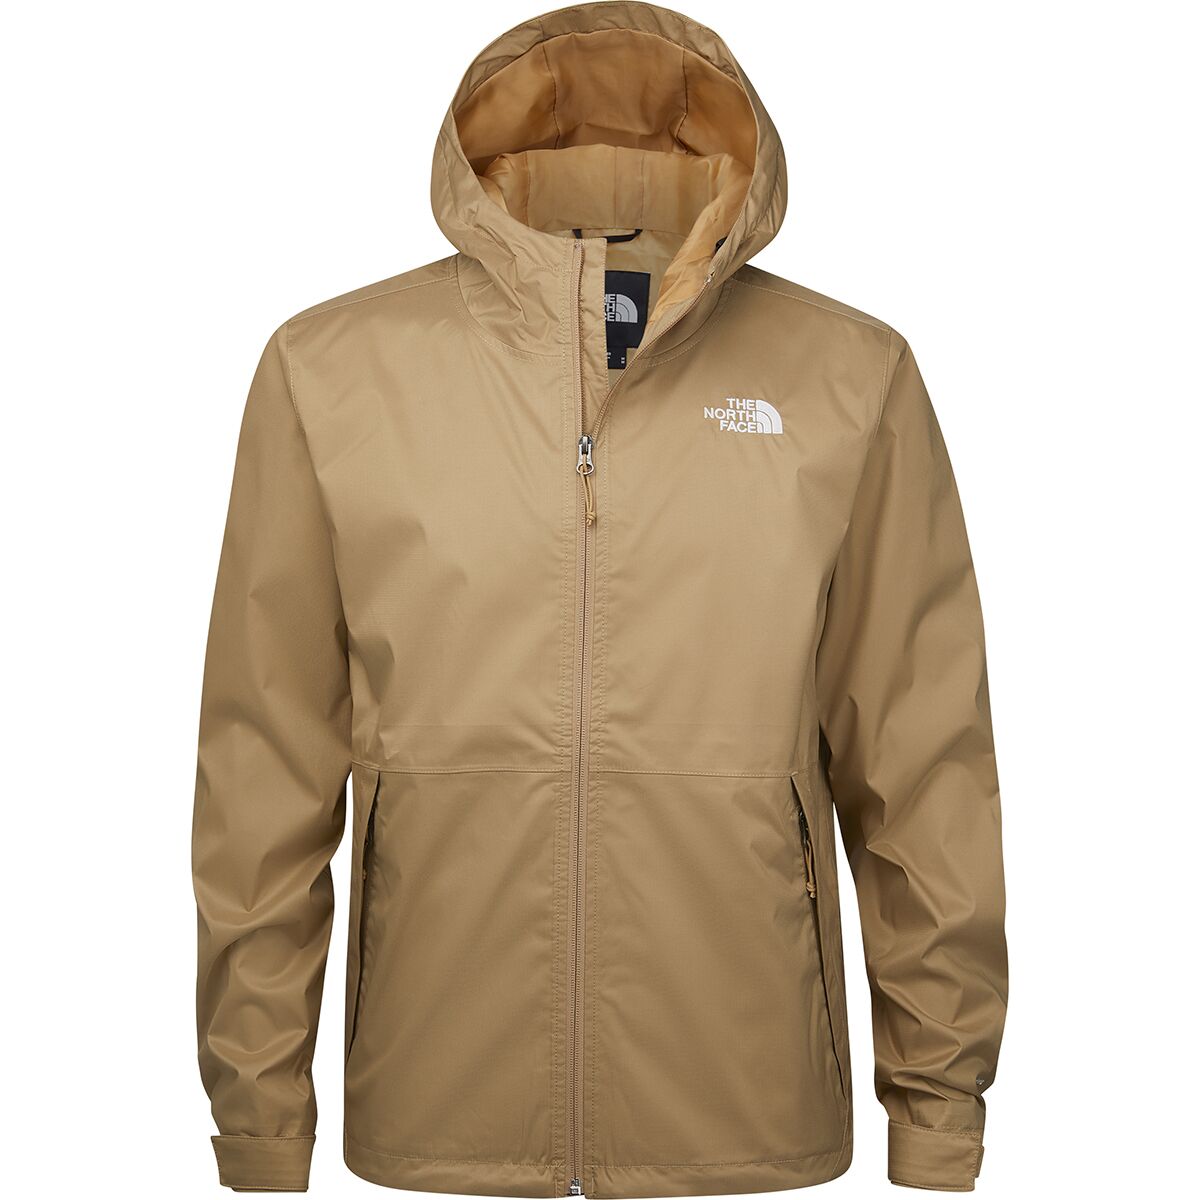 The North Face Millerton Jacket - Men's | Backcountry.com